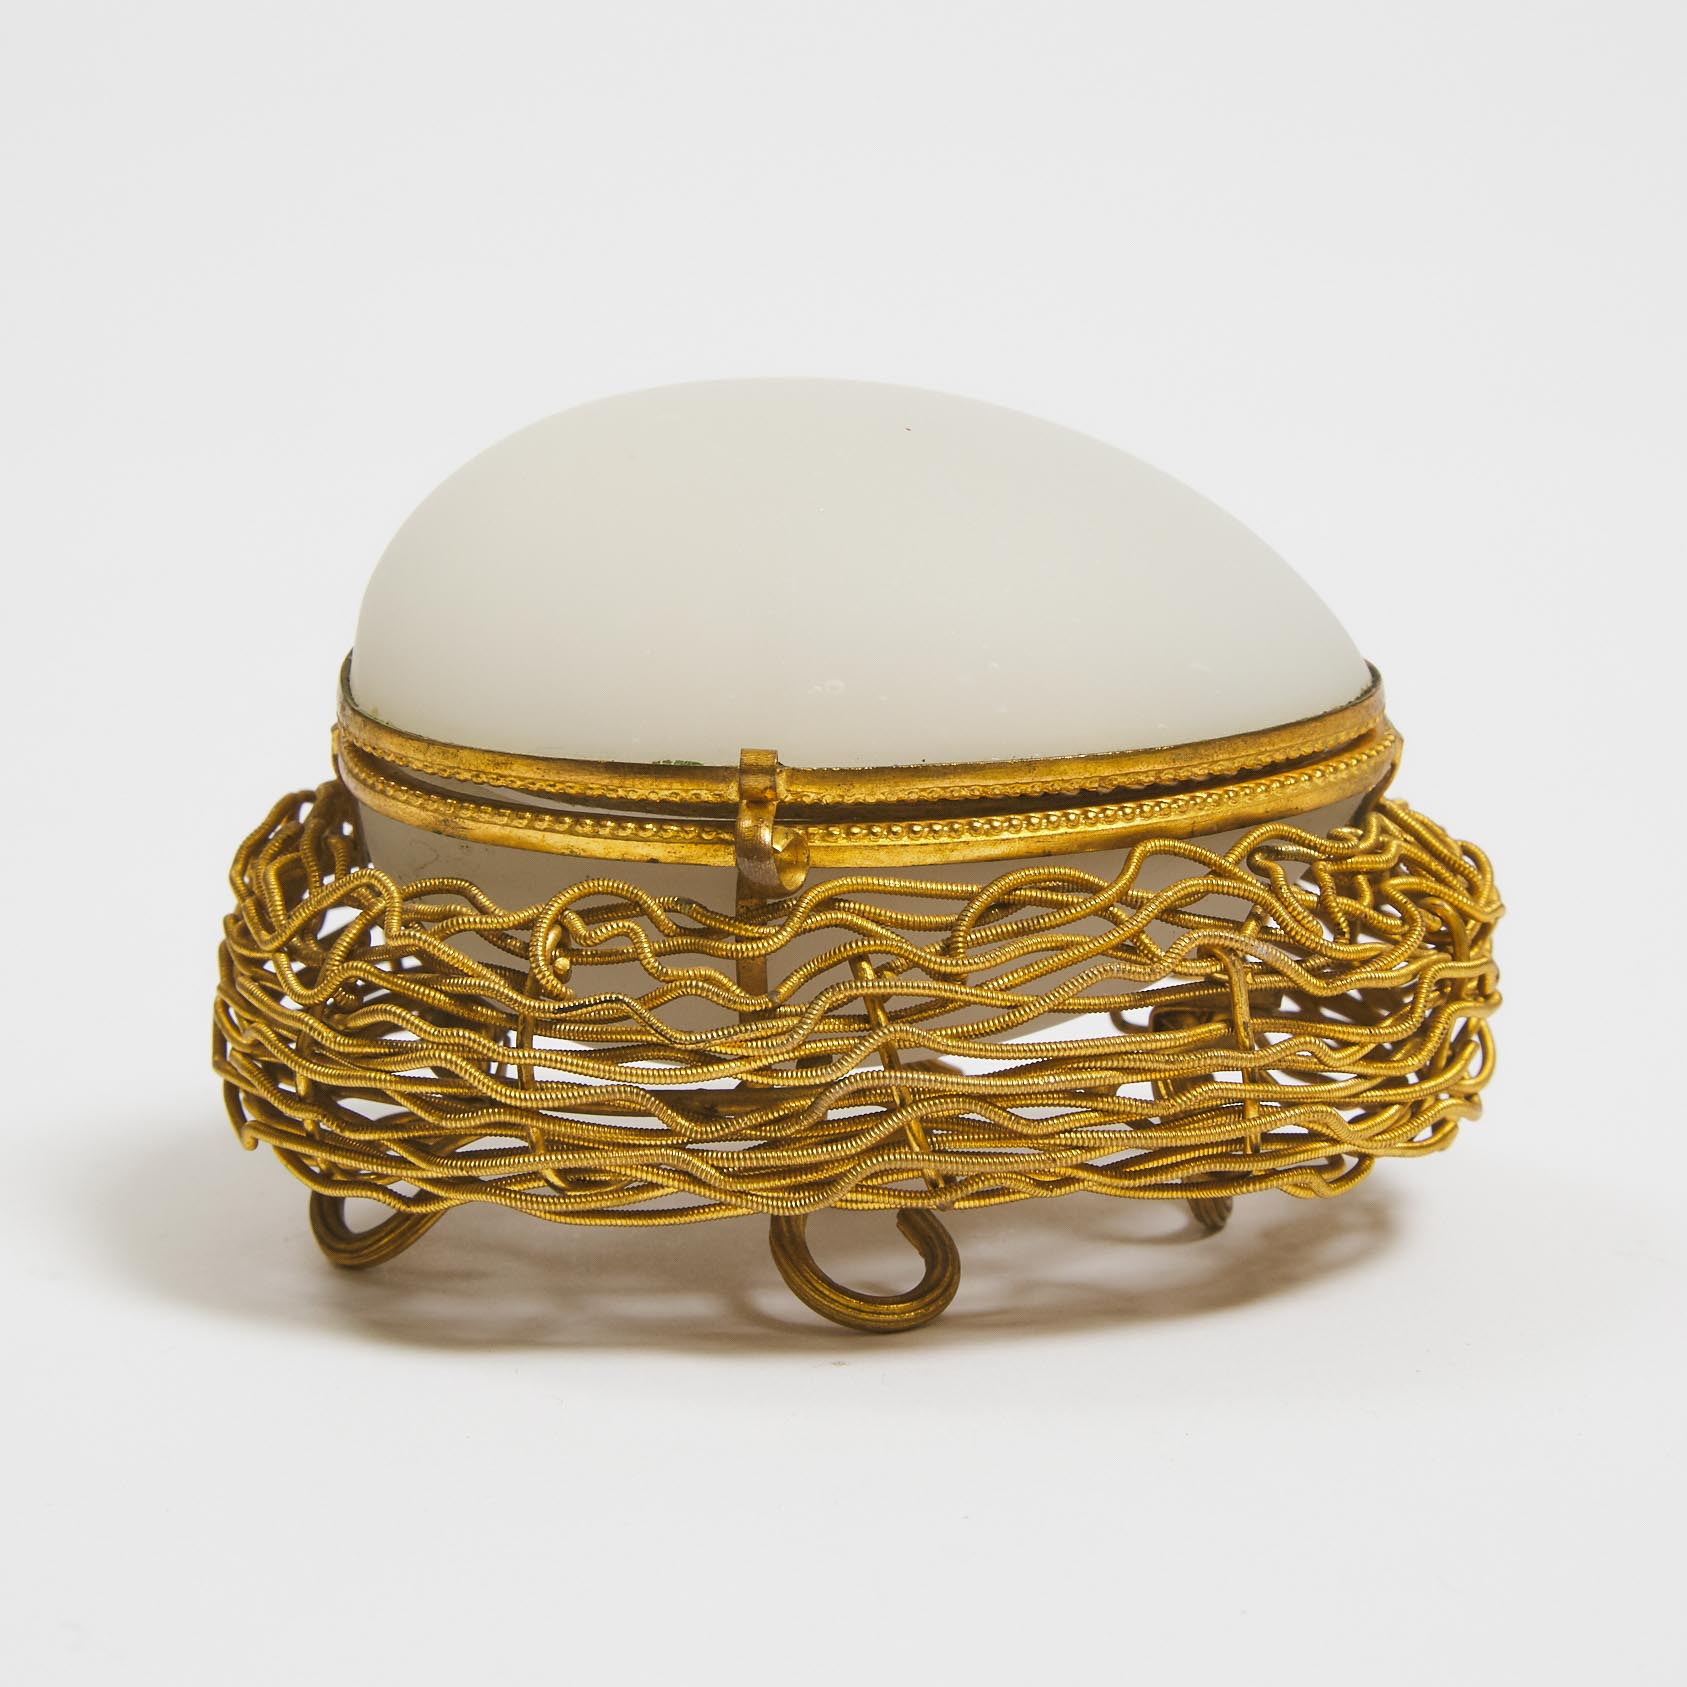 French White Satin Glass and Gilt Wire Nest and Egg Form Sewing Etui, c.1860